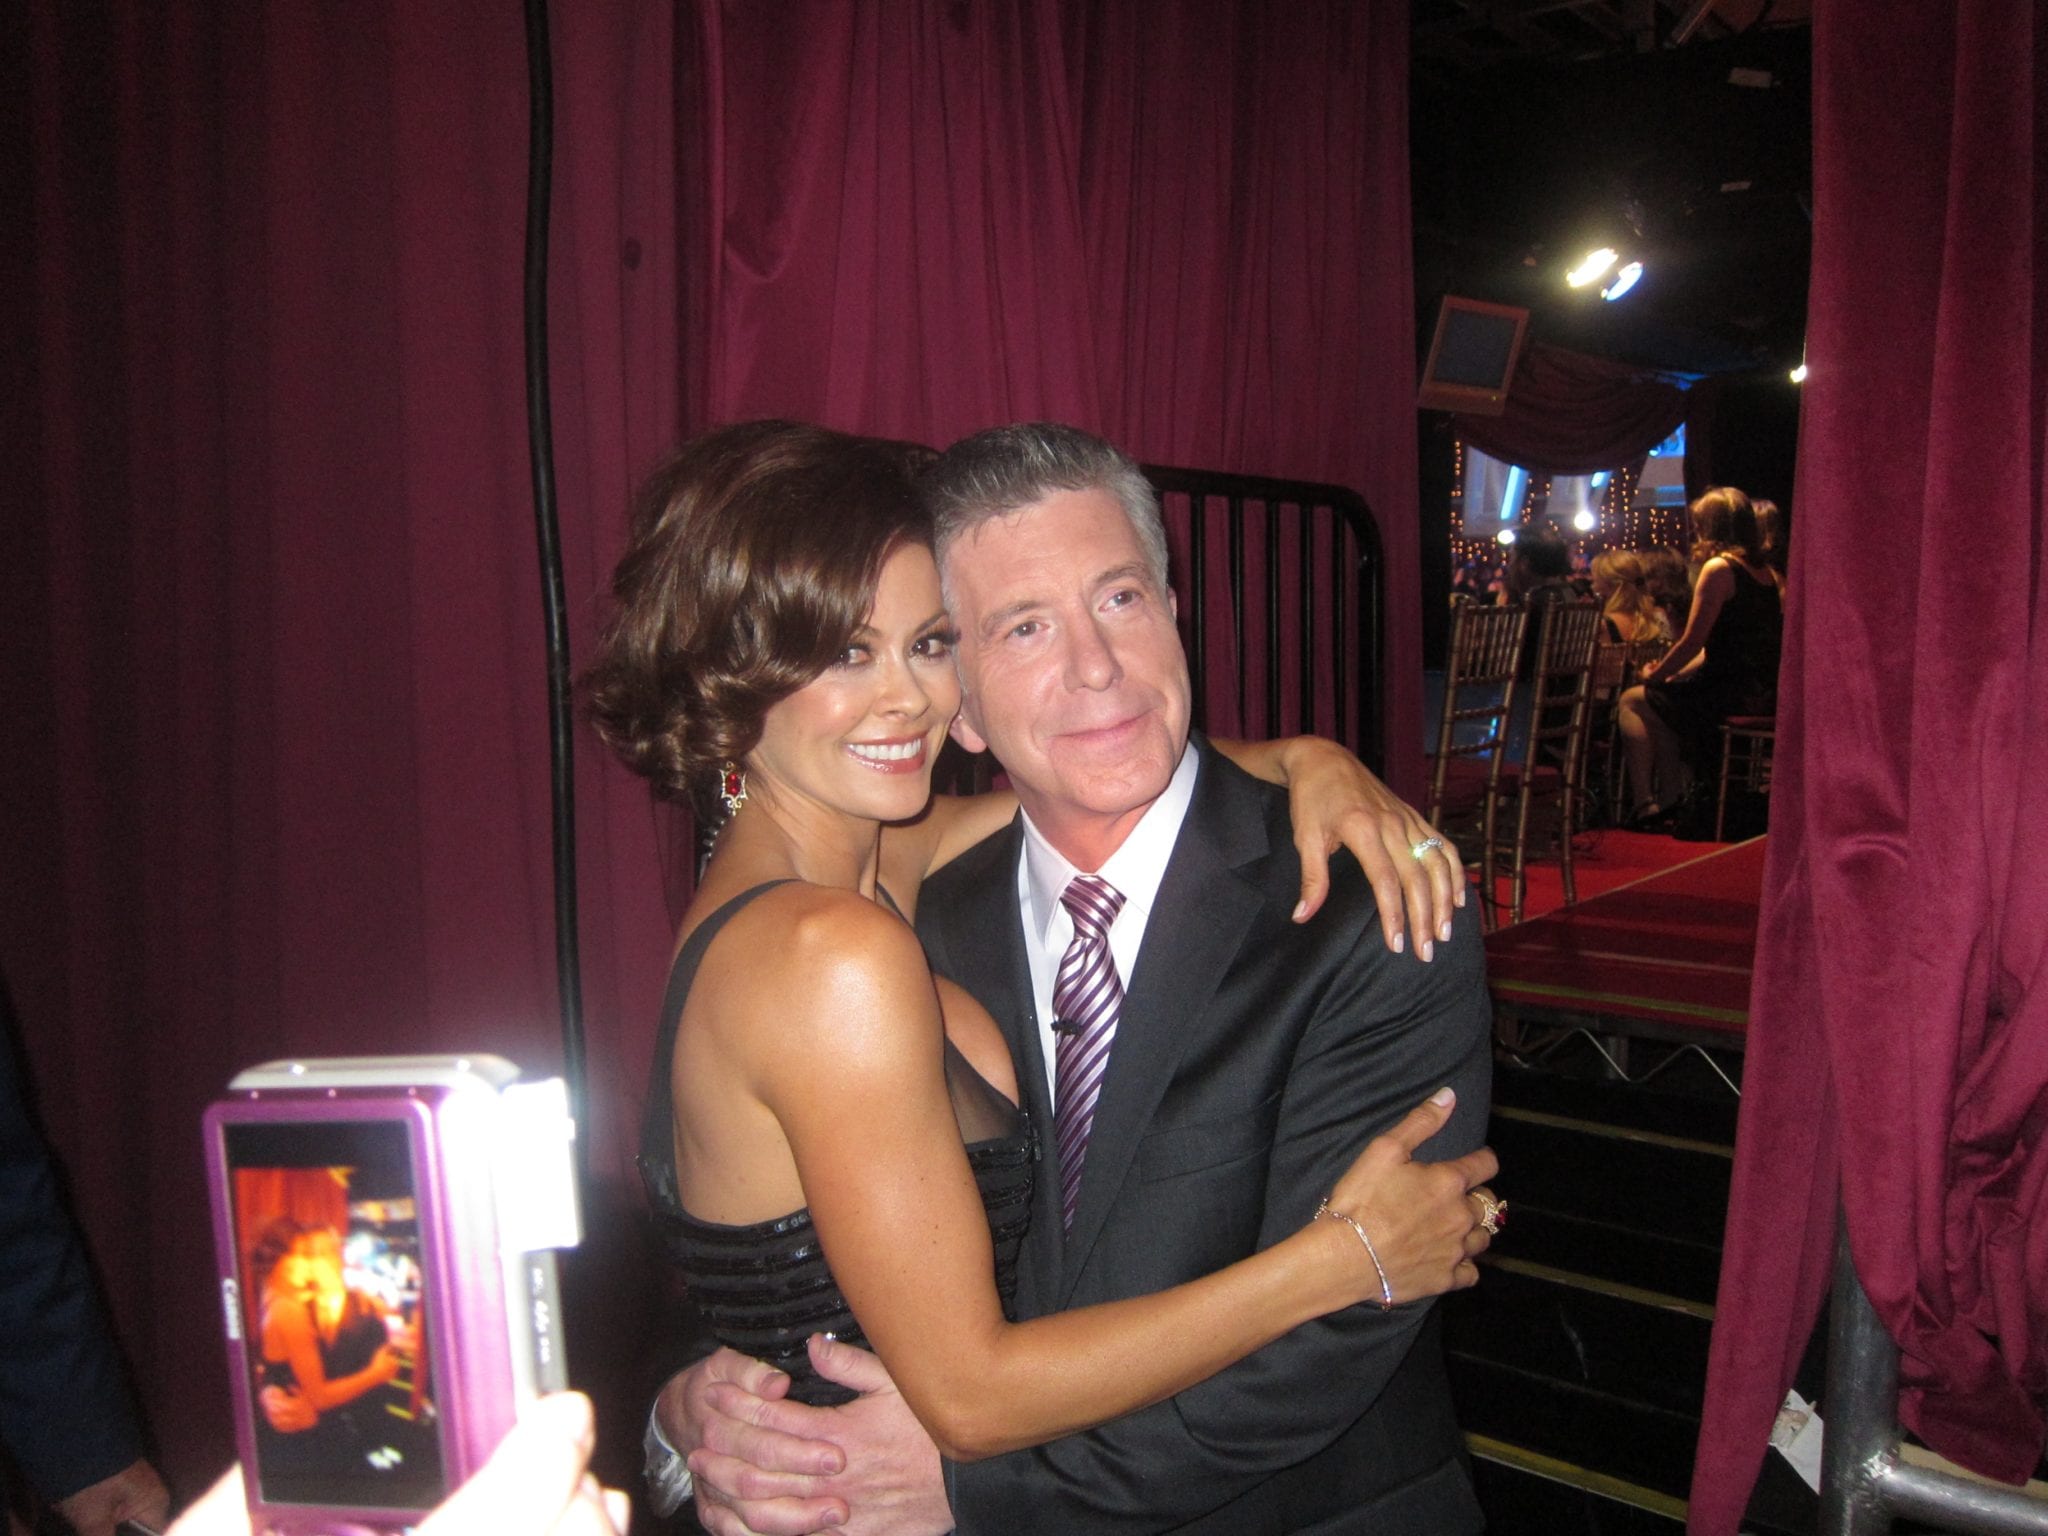 DWTS: Behind the Scenes at the Semi-Finals